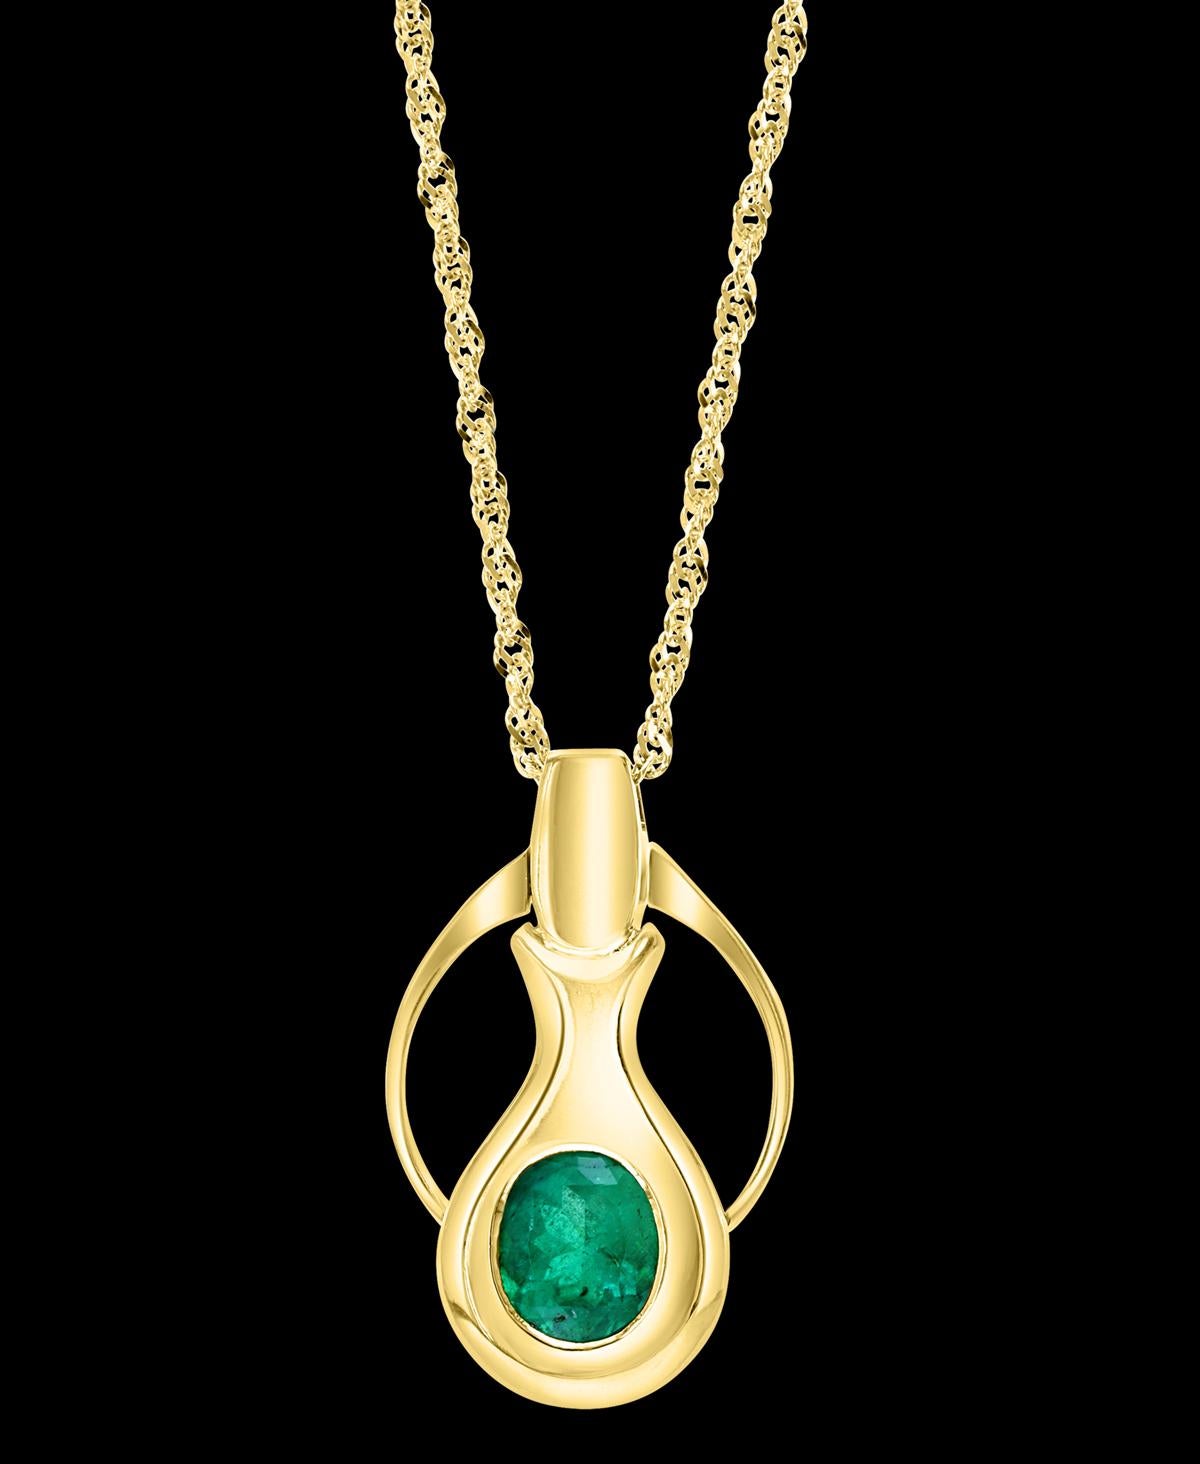 Approximately 4Ct Colombian Emerald  Pendent/Necklace 18 Karat Gold Estate Convertible to Ring Emerald and diamond Pendant  necklace. This eye-catching pendant necklace features a  4  ct total weight of Oval Colombian Emerald, all set in 18k  Yellow